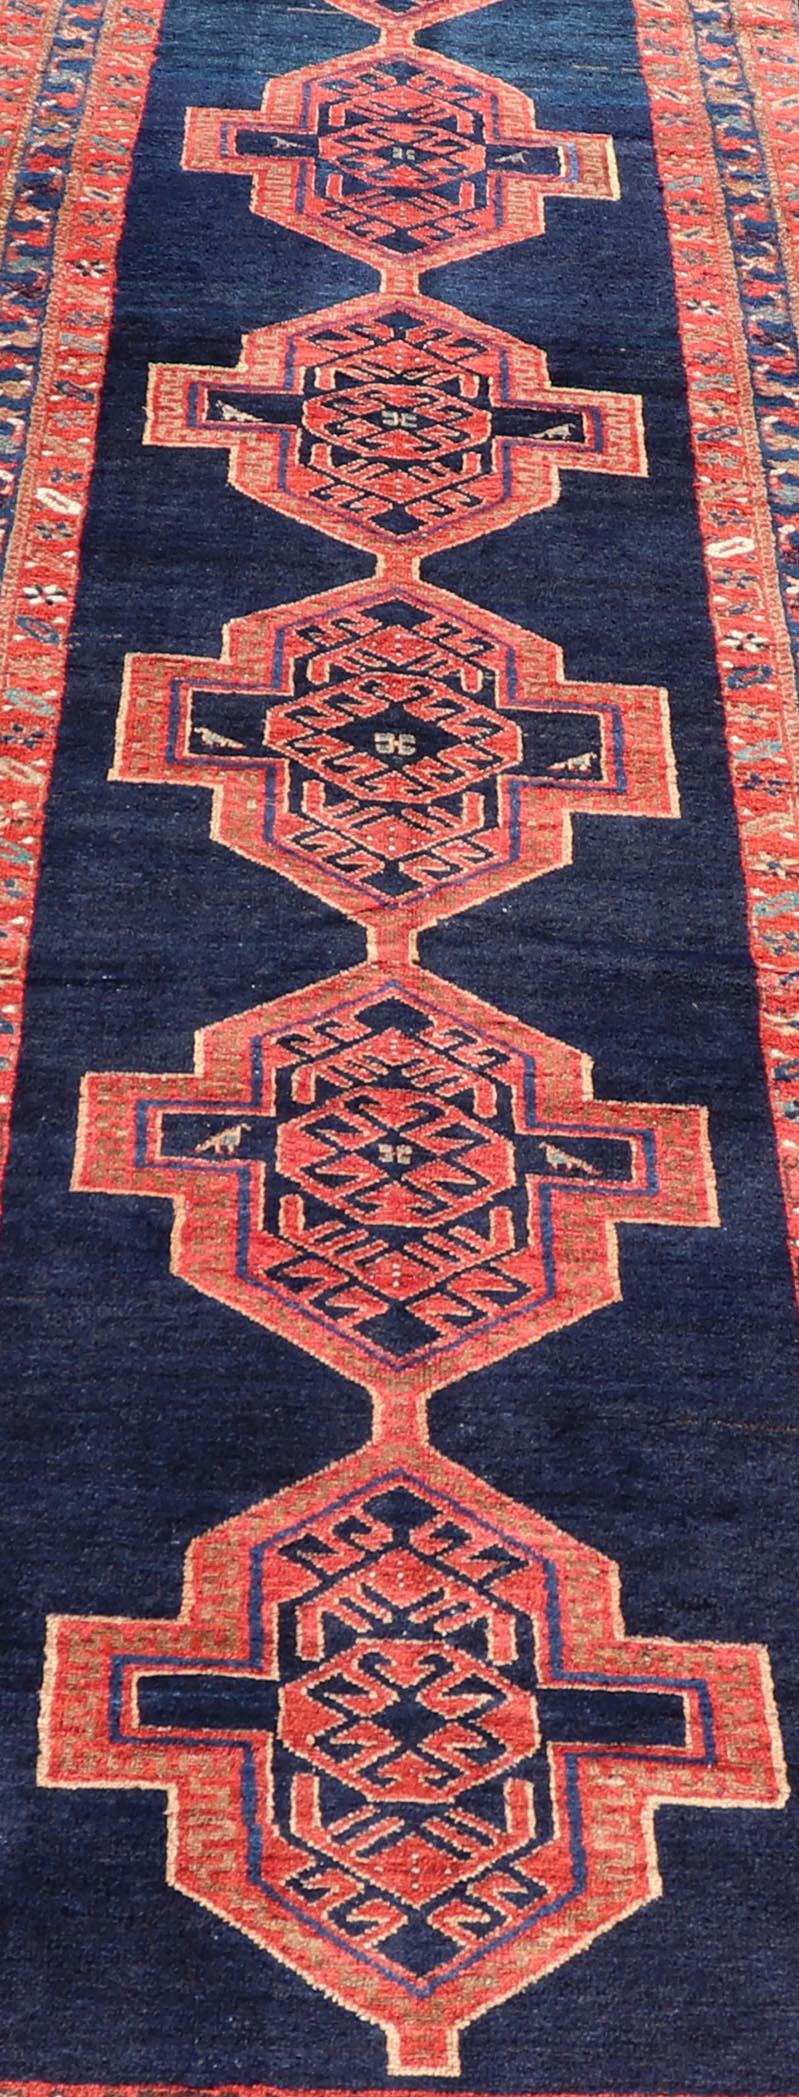 Antique Persian Azerbaijan Runner in Navy Blue Background with Large Medallions  For Sale 2